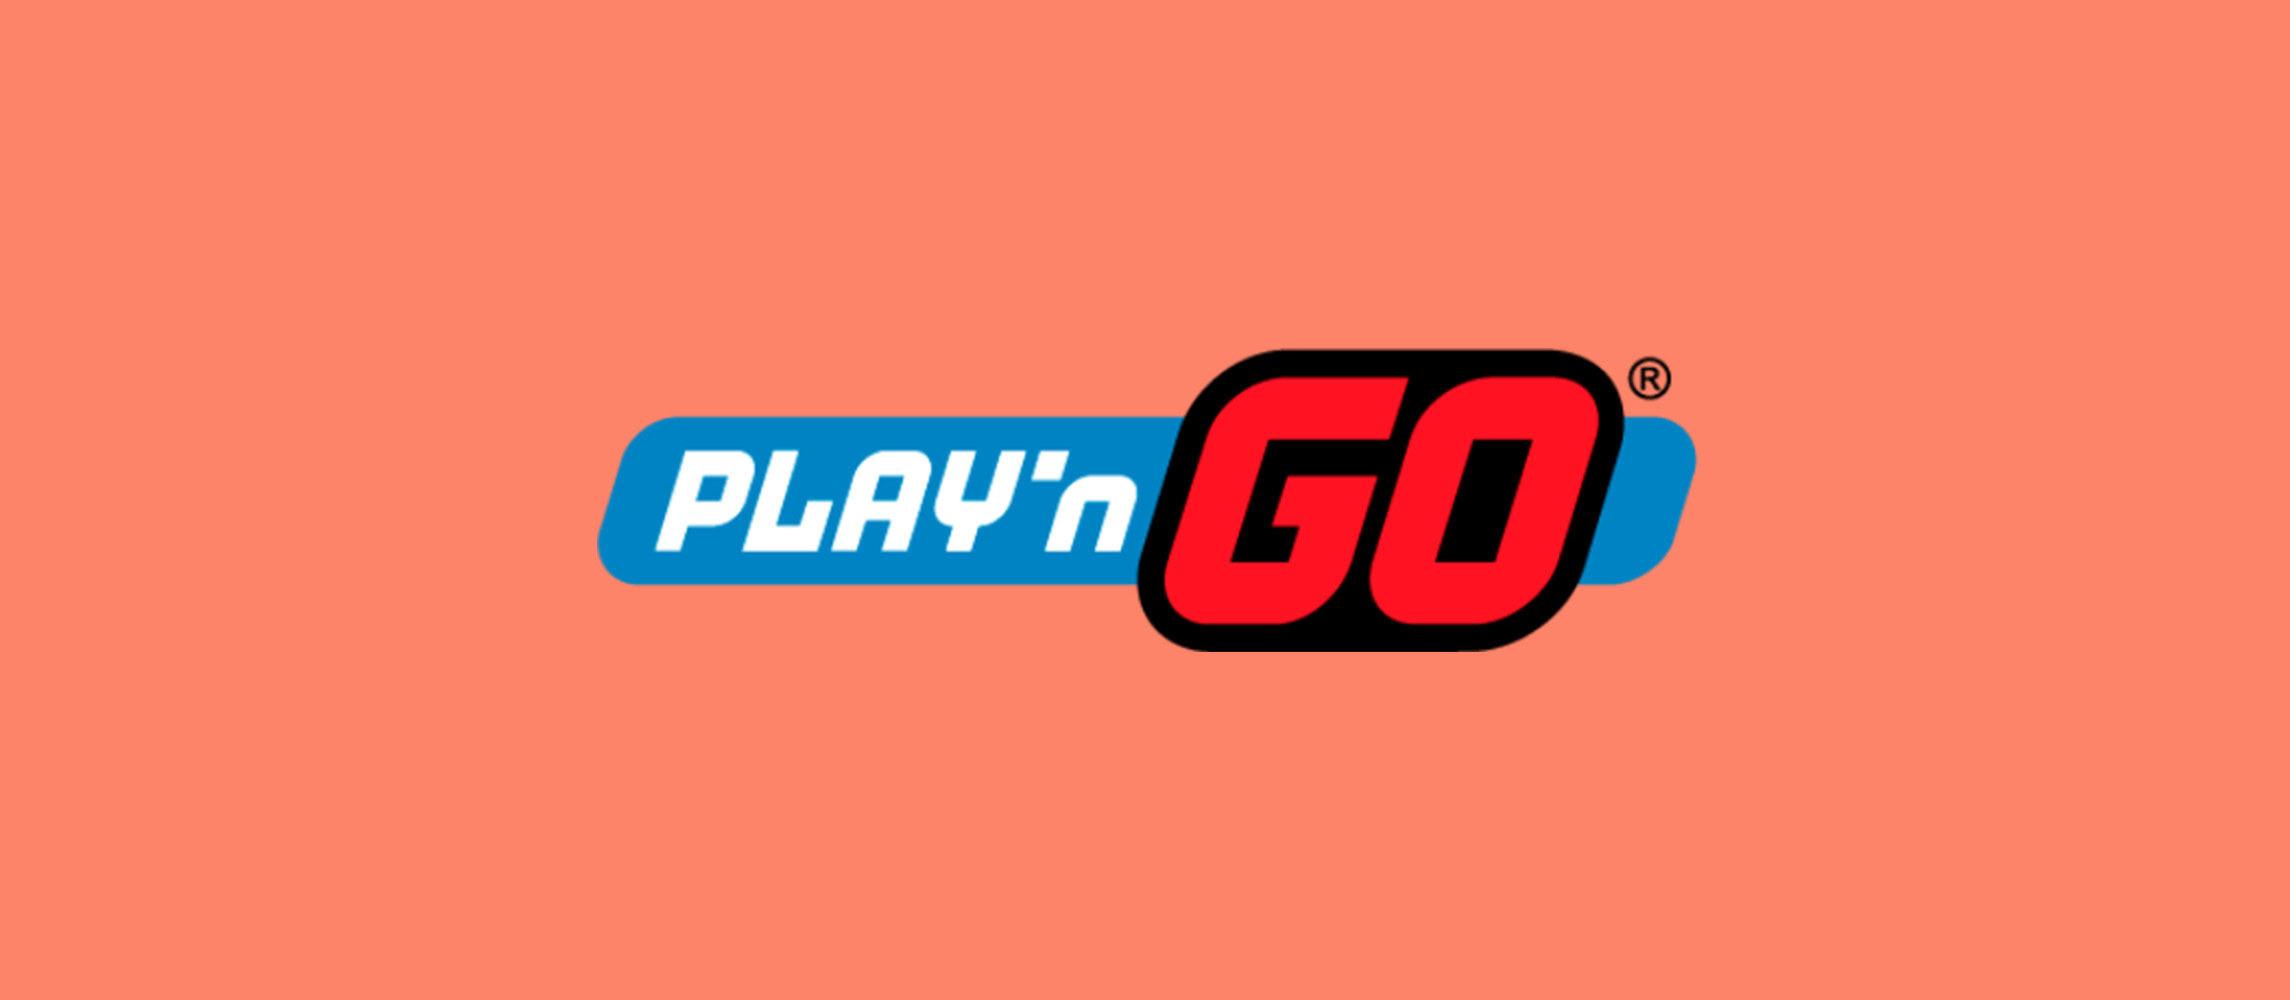 Look back into CasinoWow’s interview with Play'n GO about their plans for 2021.